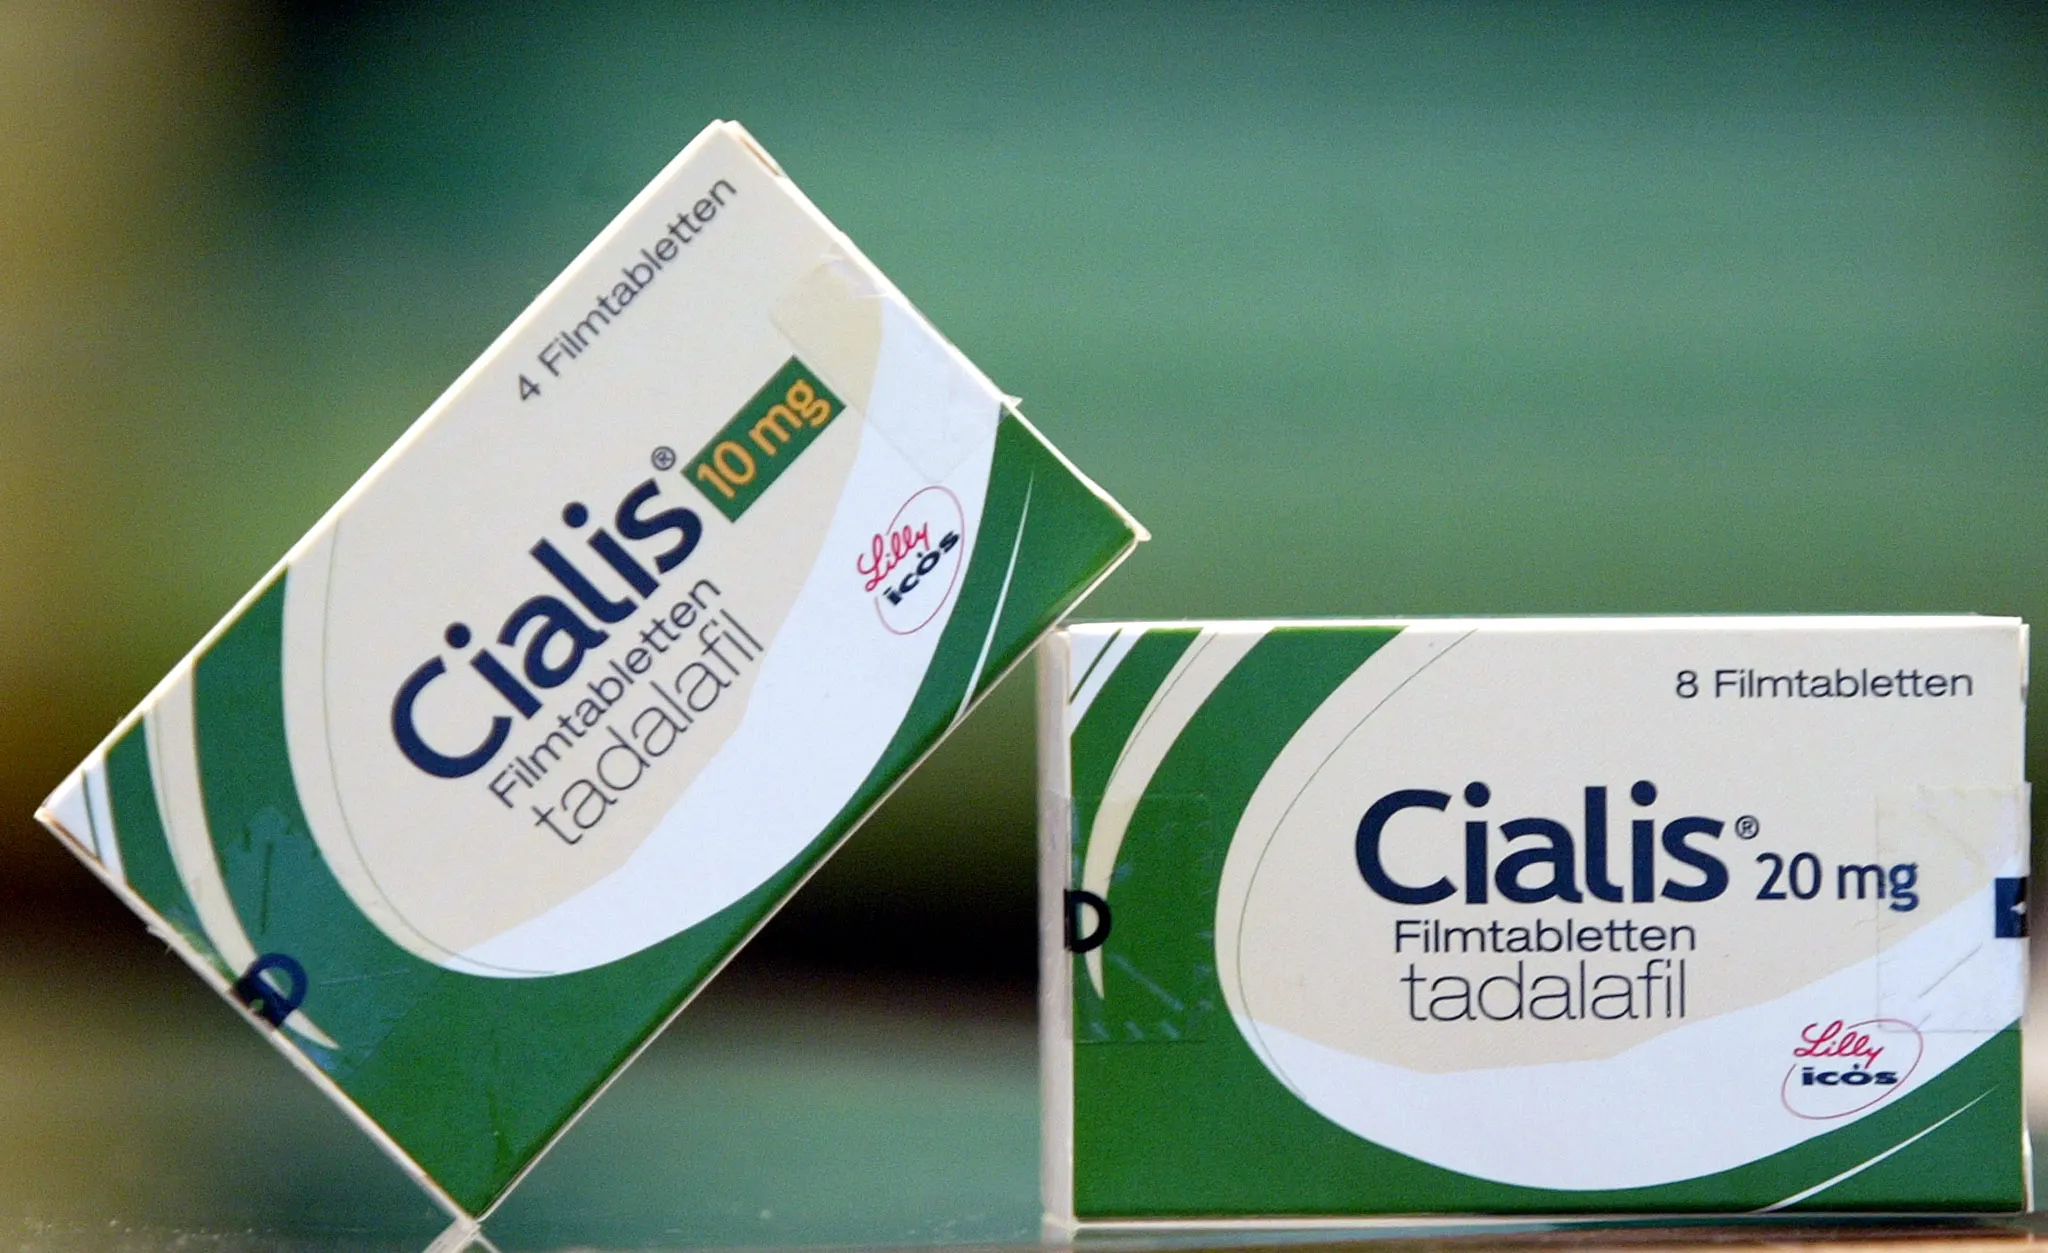 Erectile dysfunction drug Cialis seeking over-the-counter approval ...